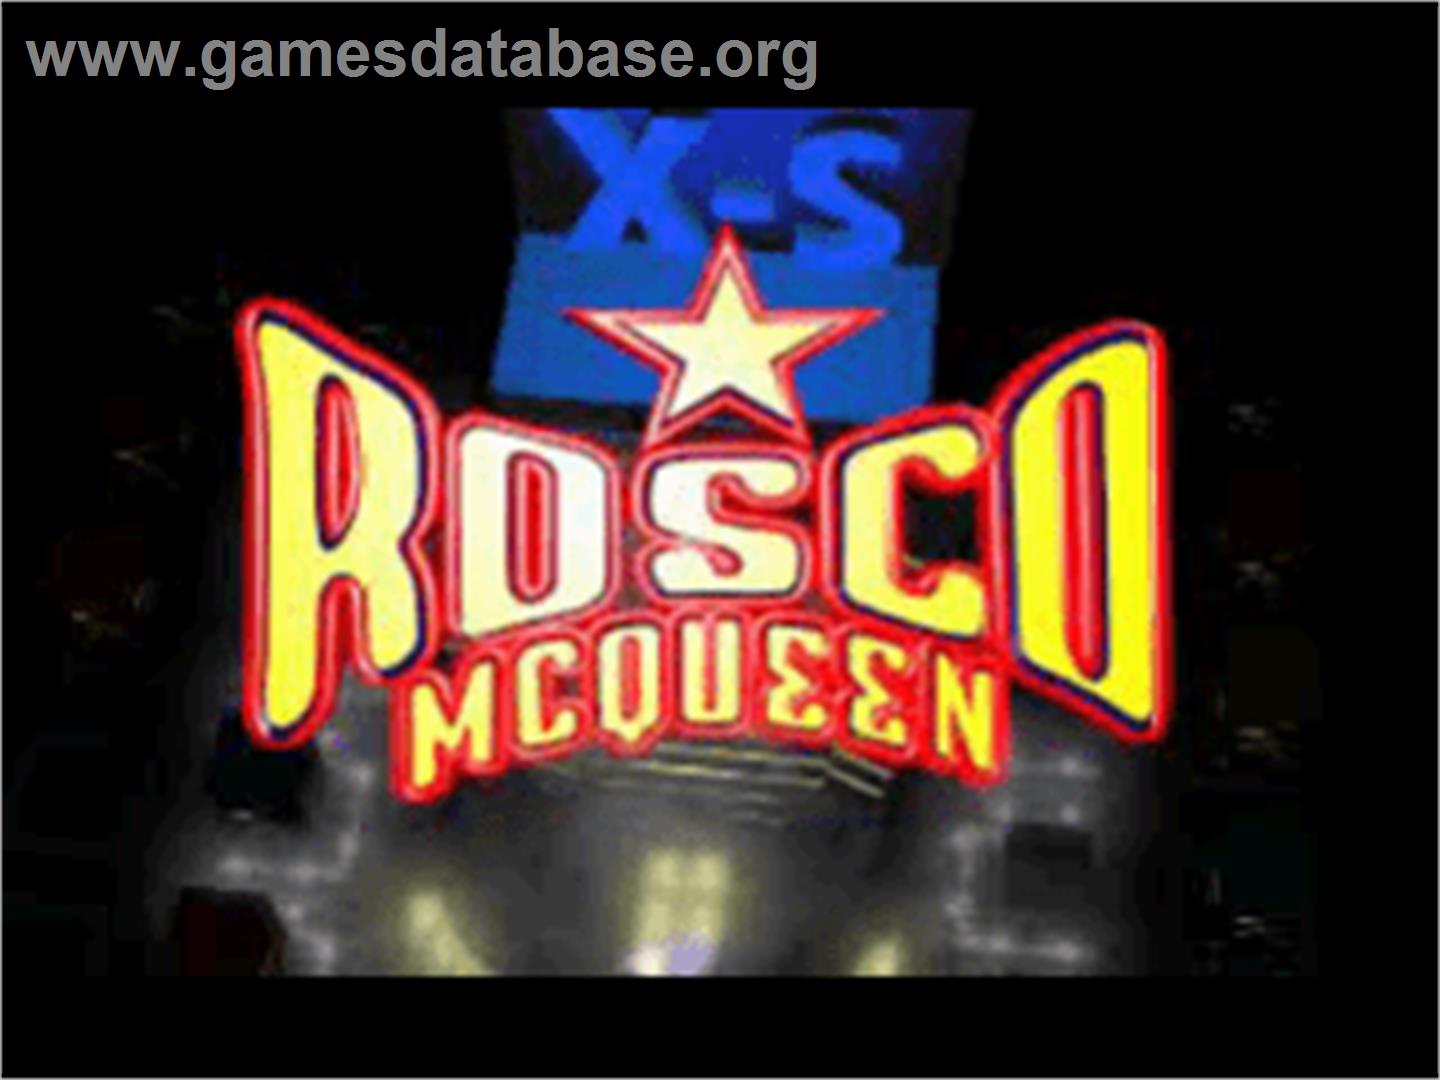 Rosco McQueen Firefighter Extreme - Sony Playstation - Artwork - Title Screen